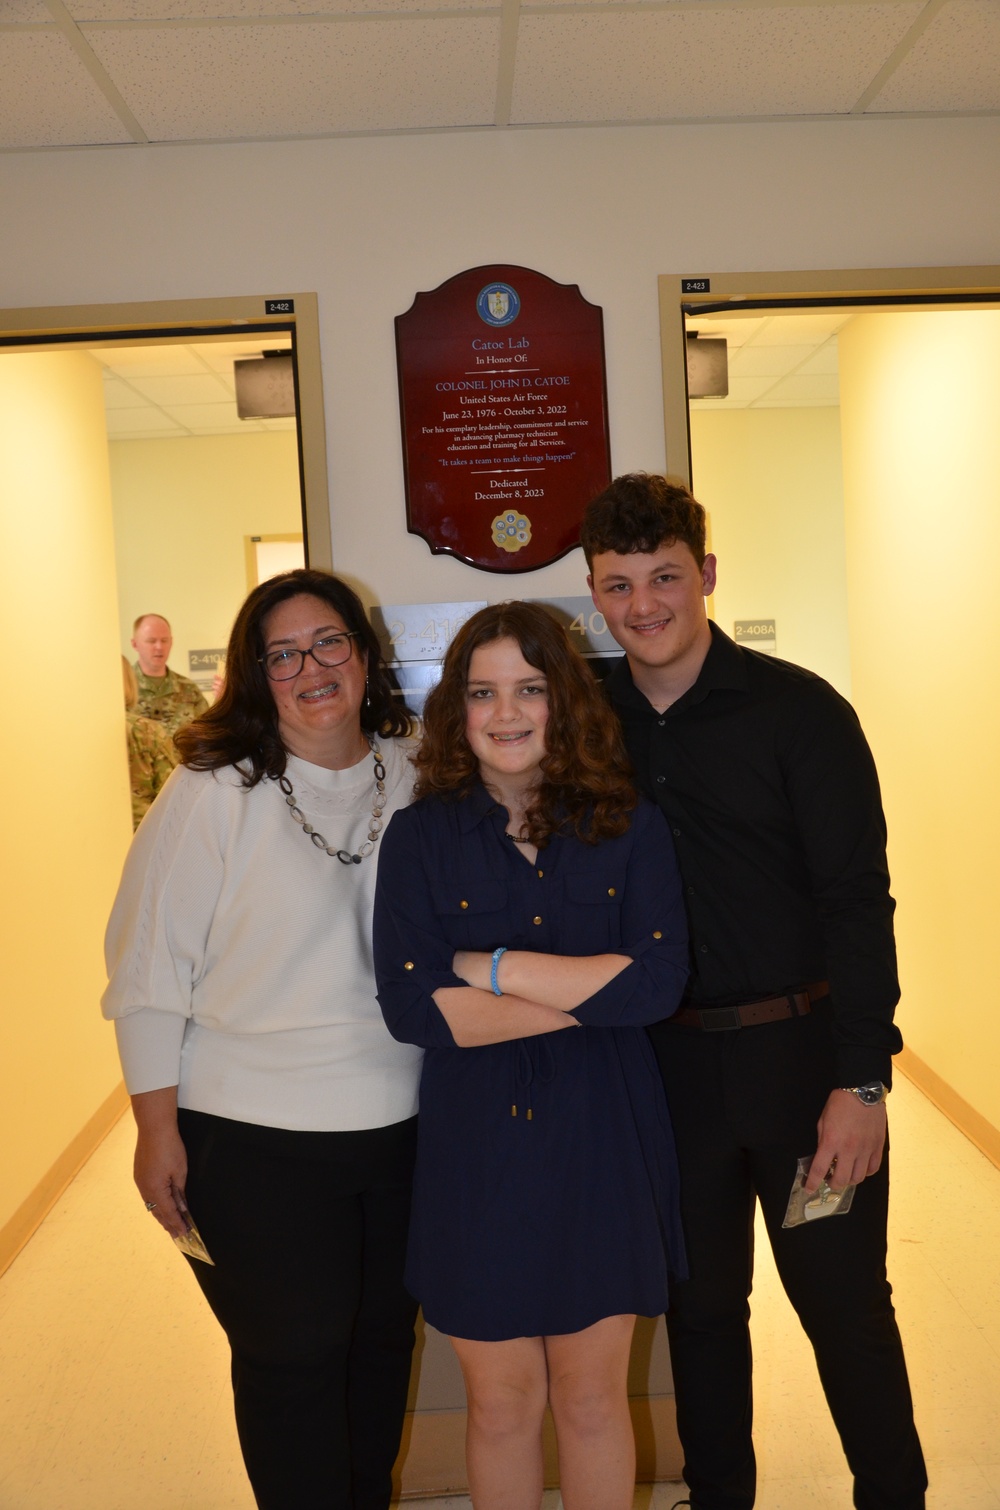 METC Pharmacy Training Lab Named in Honor of Late Program Director